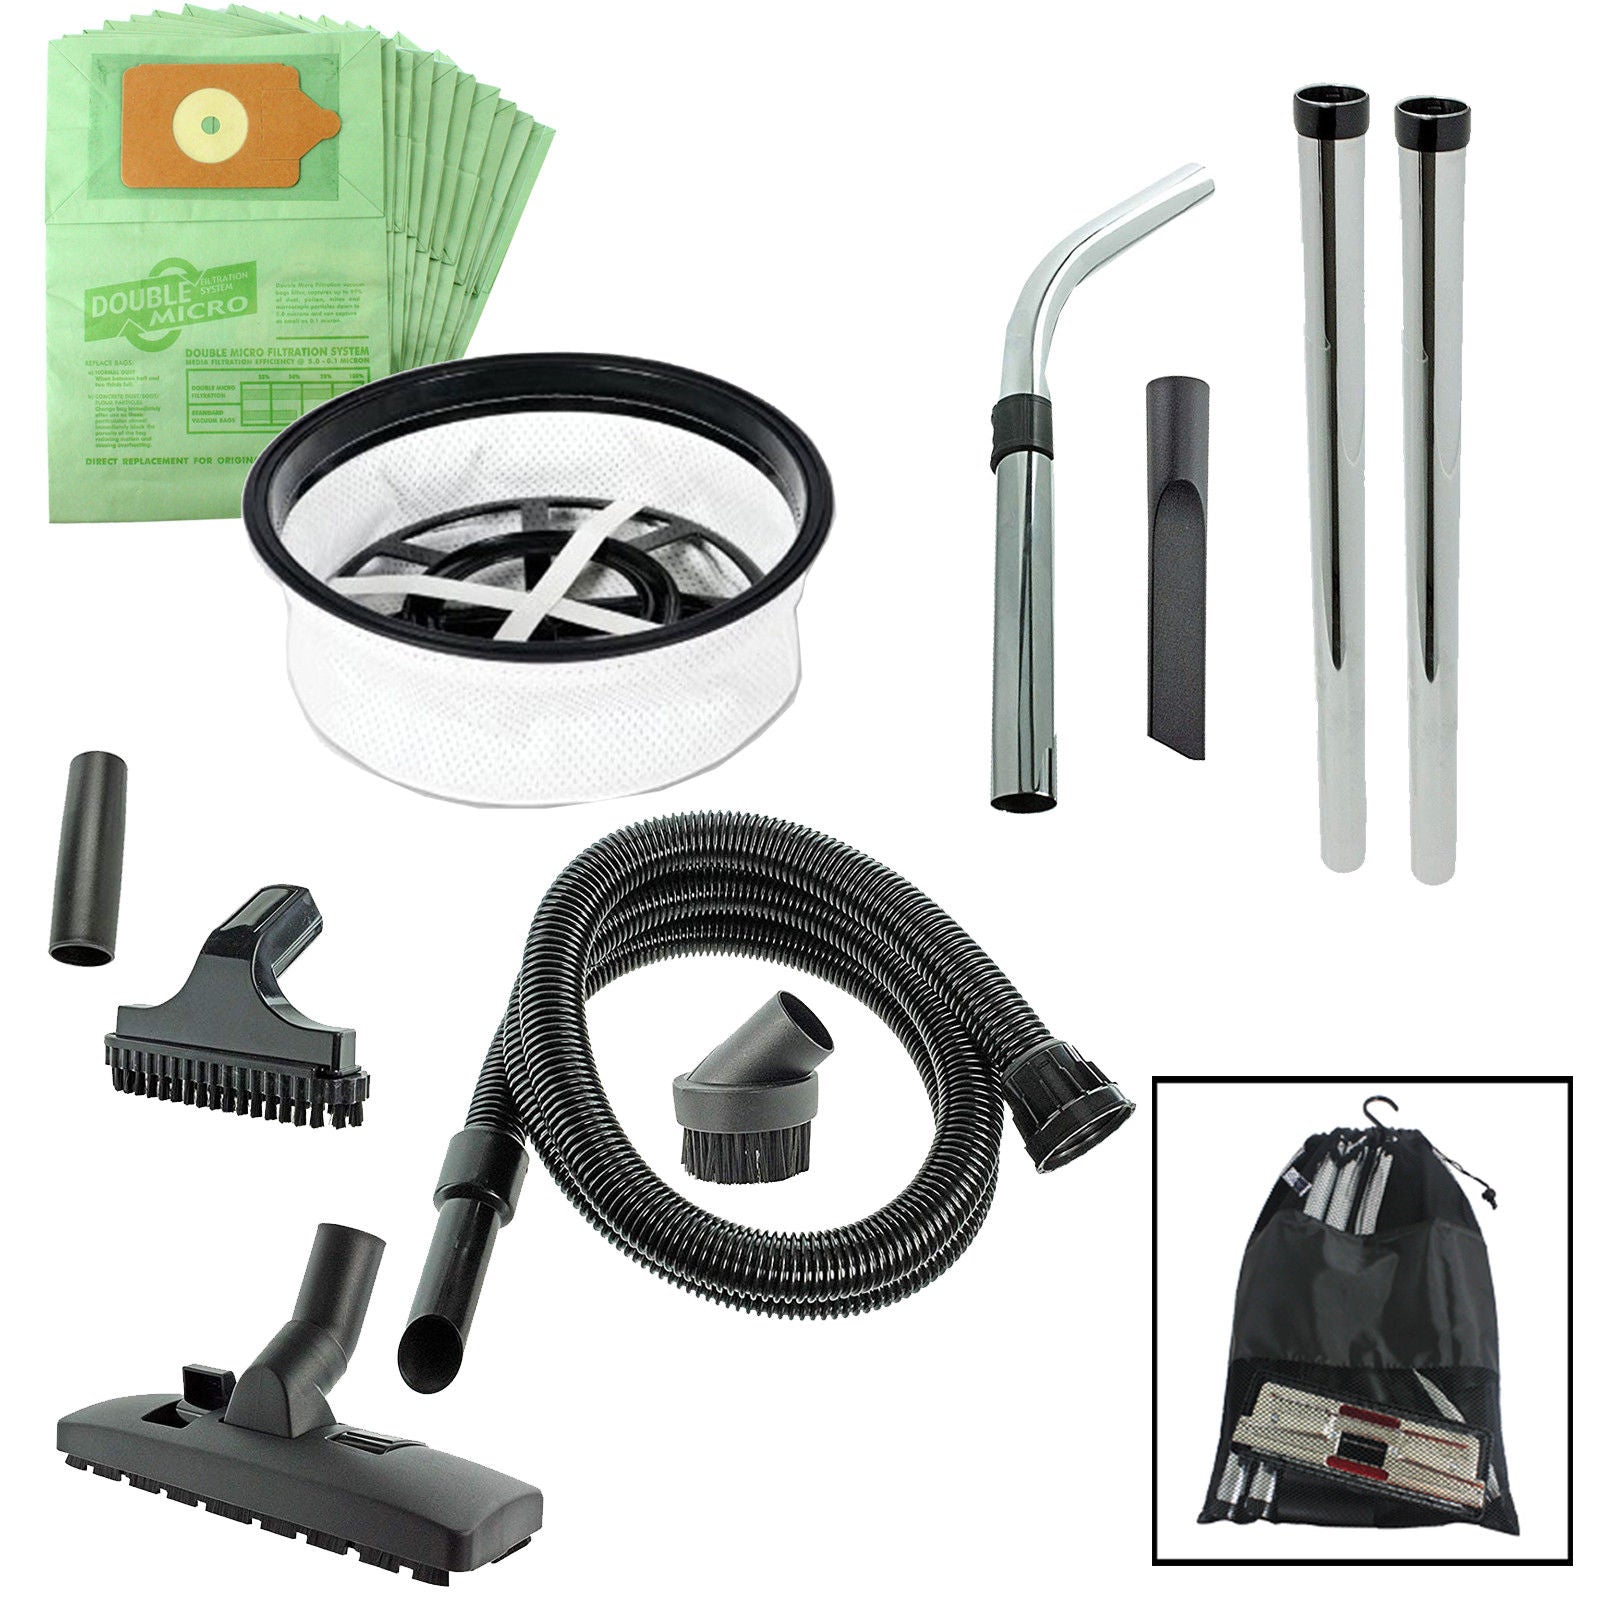 SPARES2GO 2.5m Hose Tool Kit Filter 10 Dust Bags for Numatic Henry Hetty James Vacuum Cleaner + Storage Bag